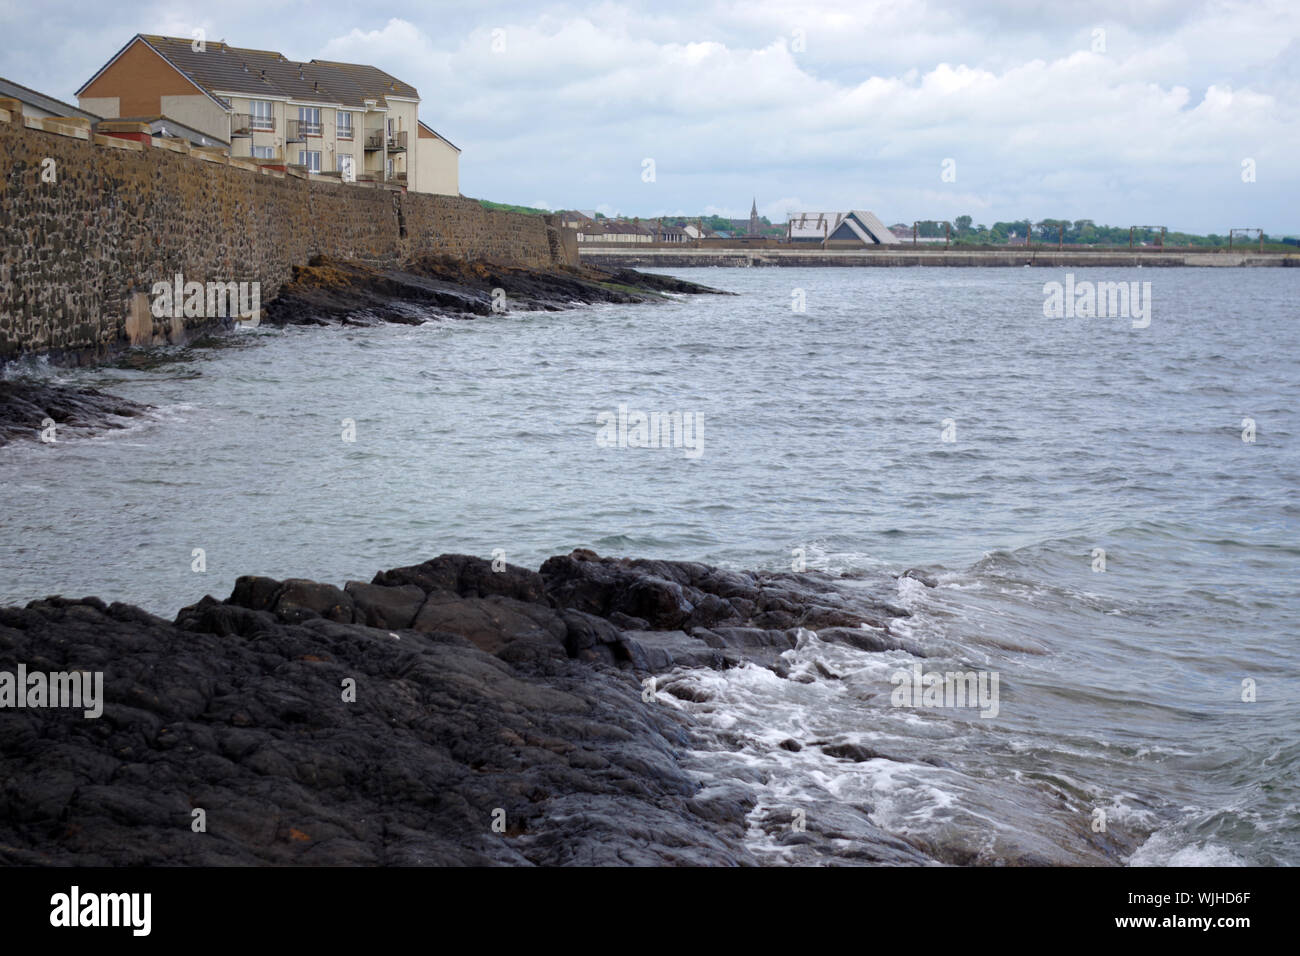 The tide is in on the rocks at Saltcoats. Saltcoats is a small town on the west coast of North Ayrshire, Scotland. Stock Photo